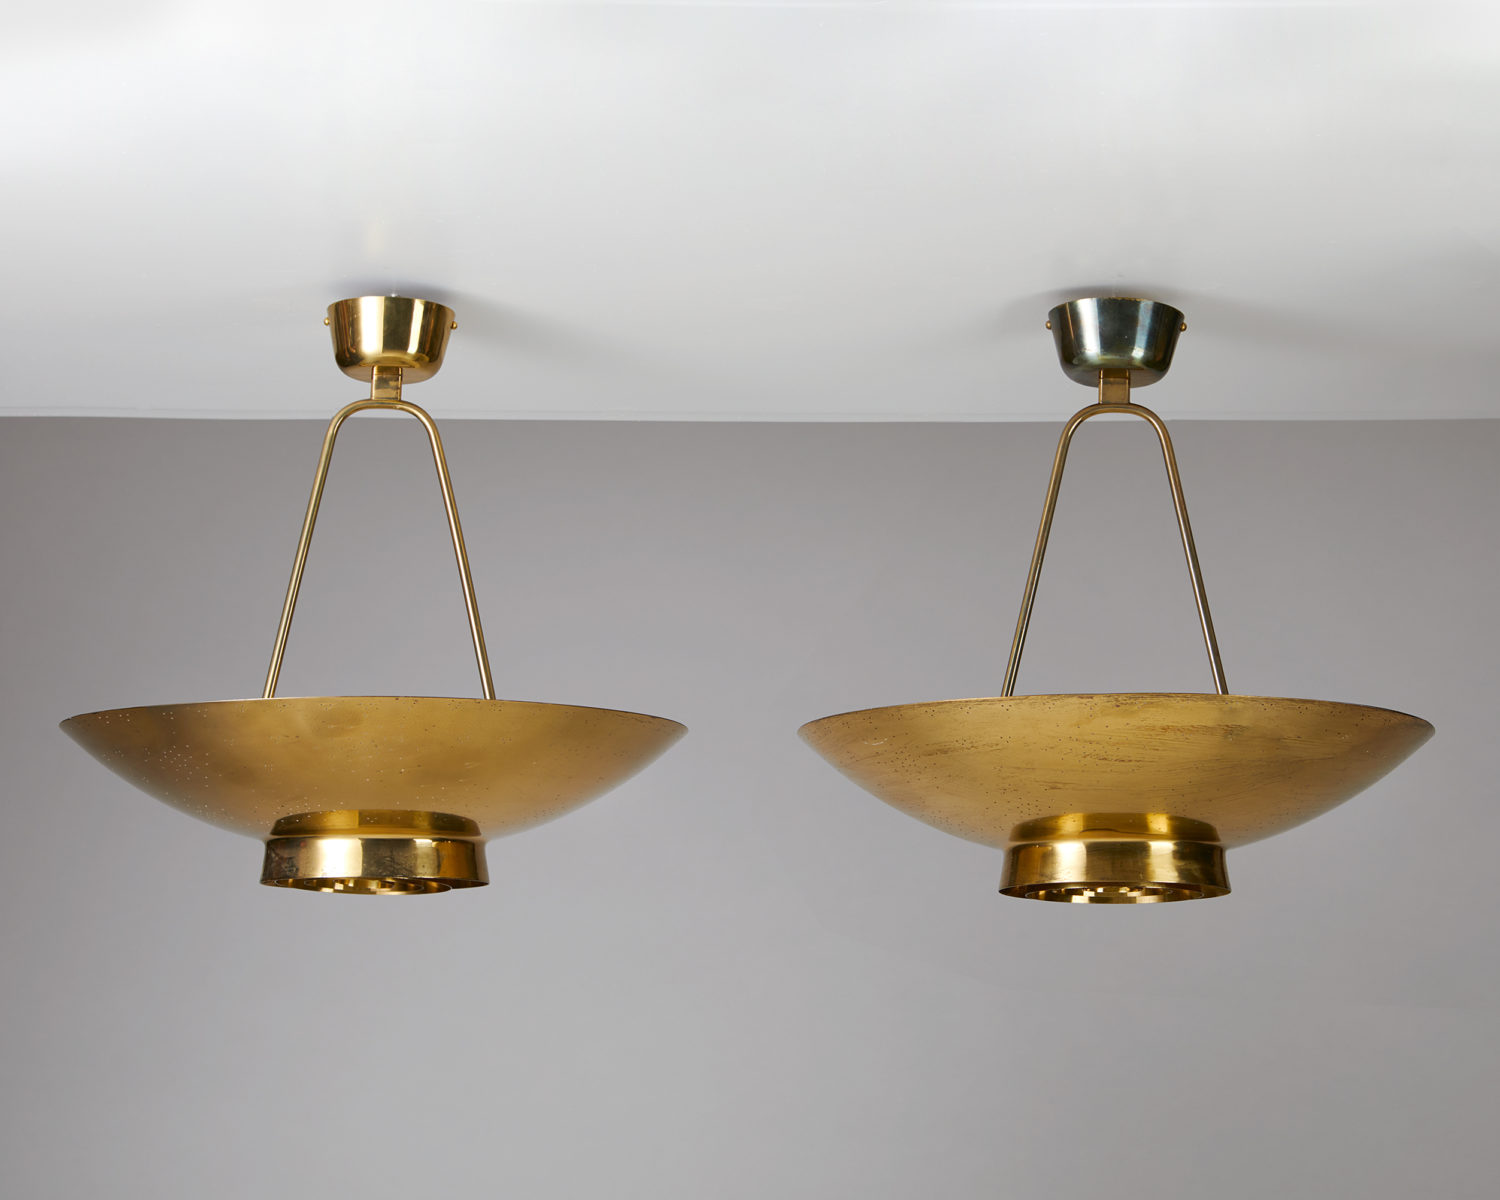 kandidatgrad bid Arkæolog Pair of ceiling lamps model 9060 designed by Paavo Tynell for Taito Oy, —  Modernity